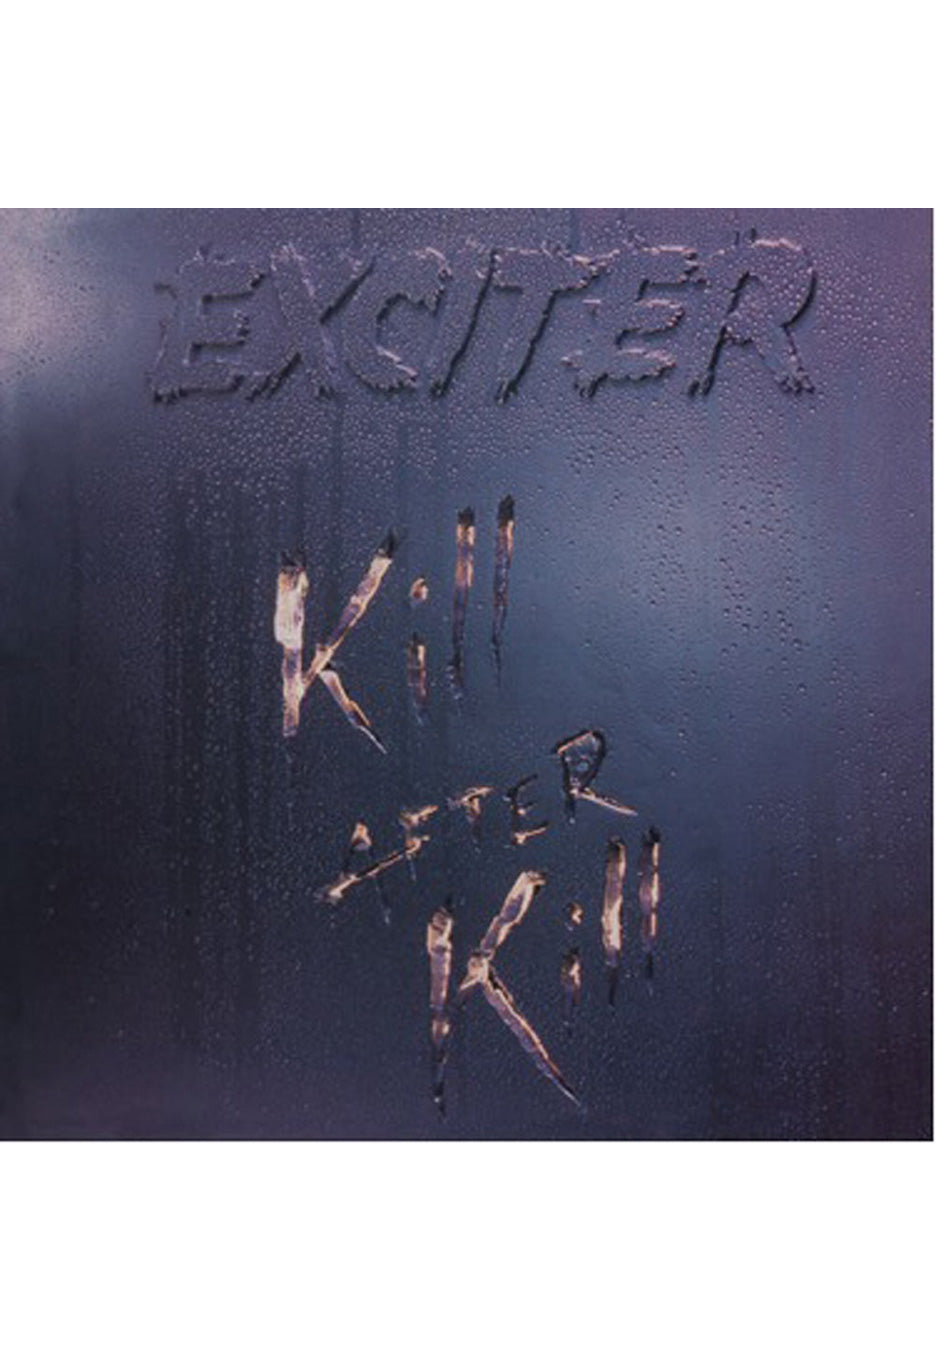 Exciter - Kill After Kill Silber - Colored Vinyl